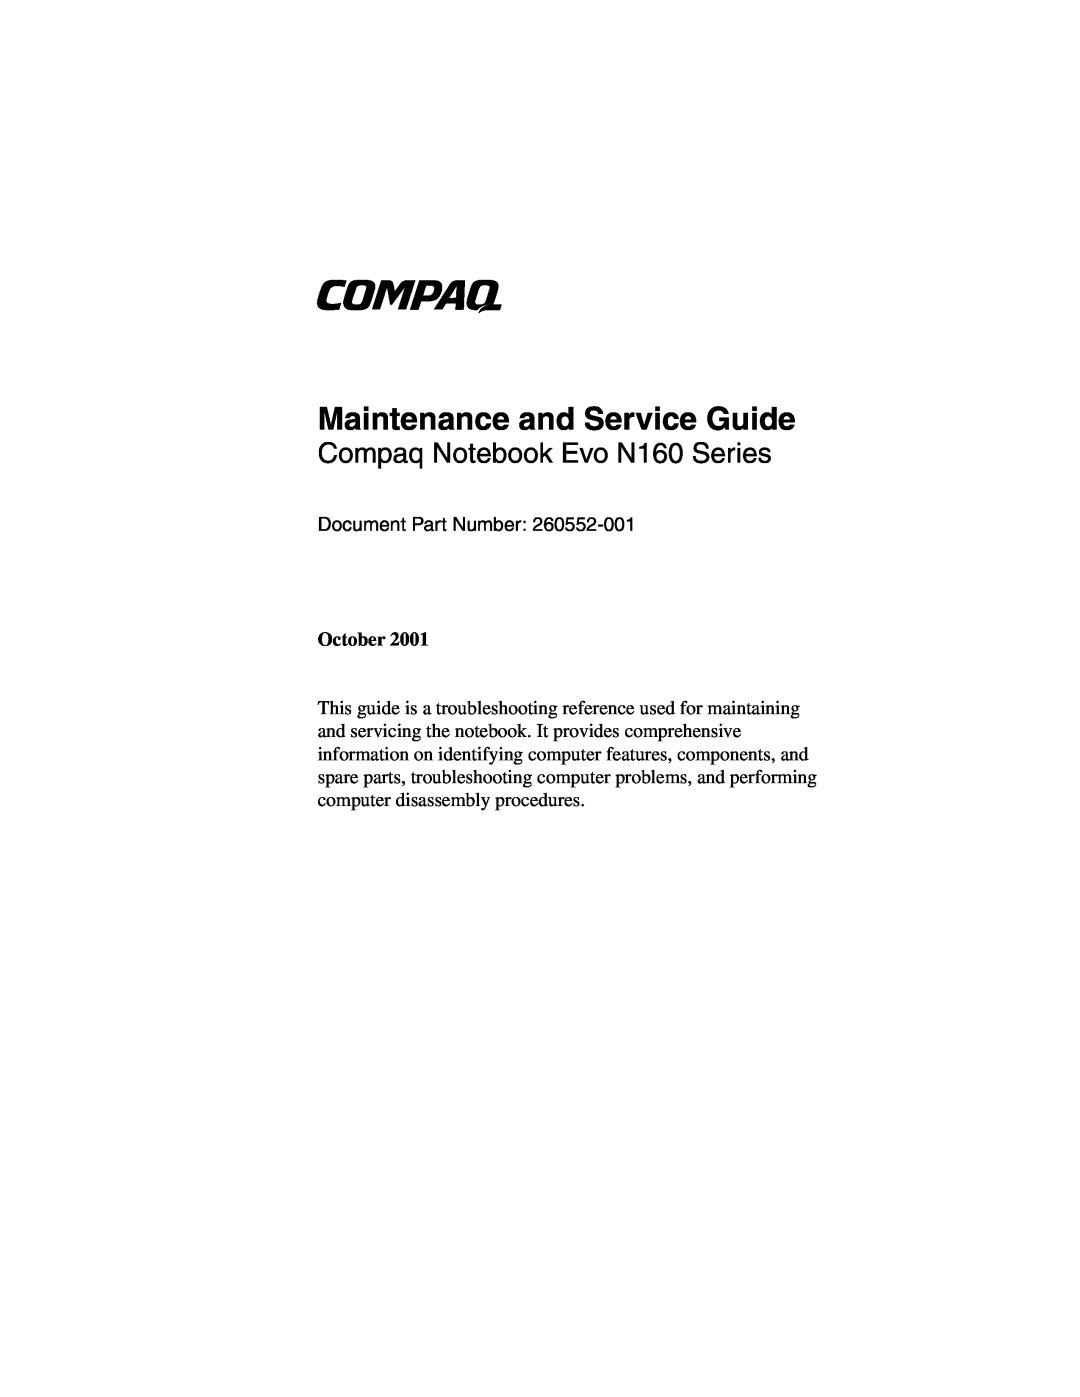 Compaq manual October, Maintenance and Service Guide, Compaq Notebook Evo N160 Series, Document Part Number 